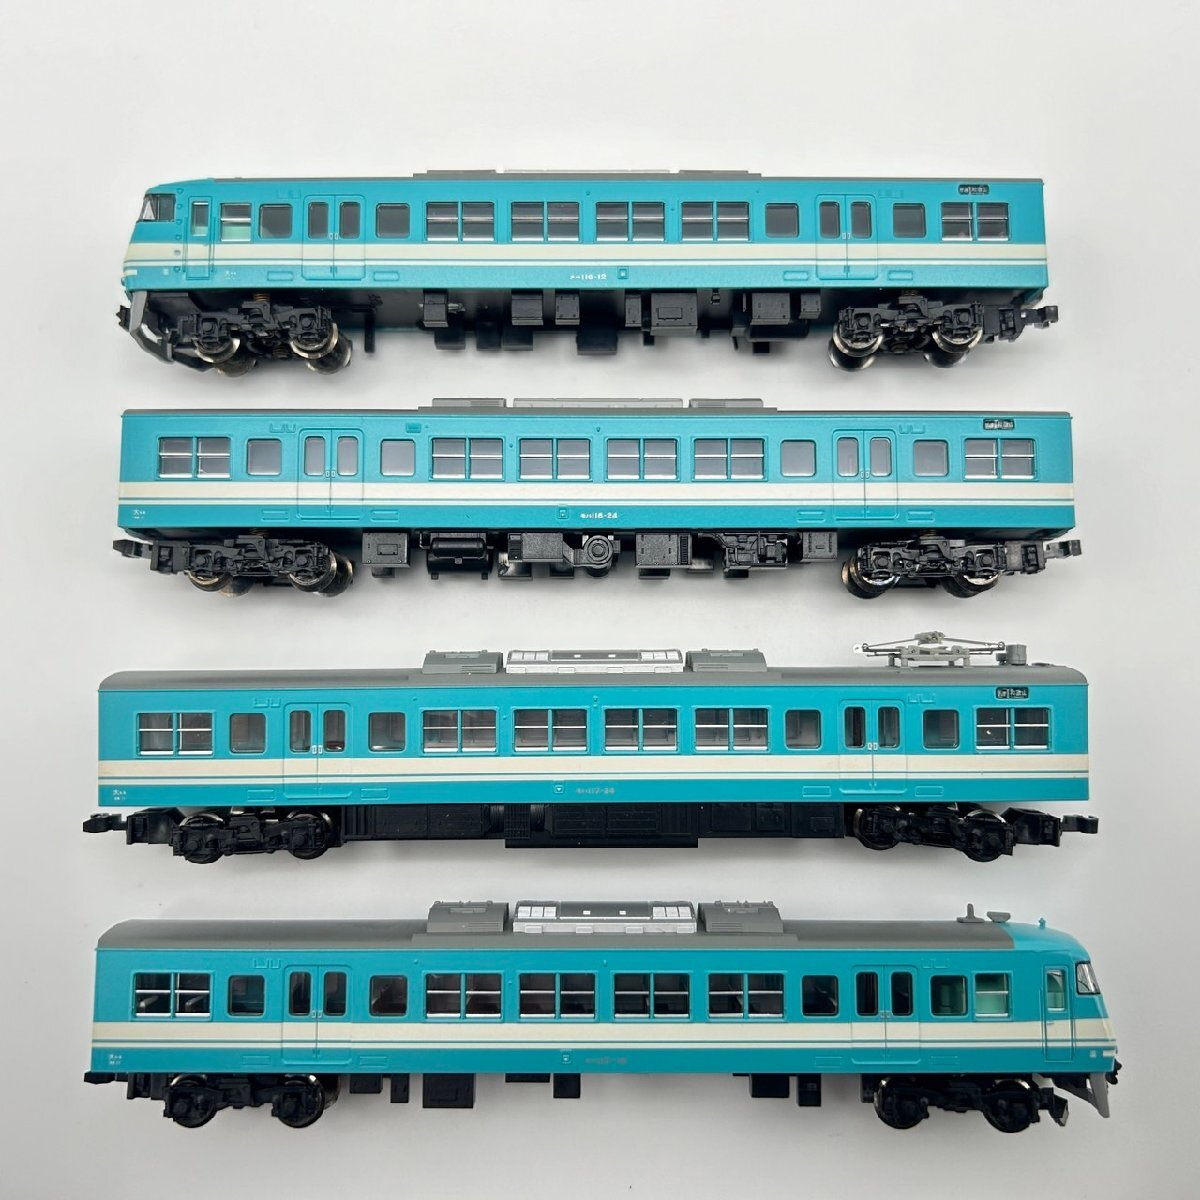 <1 jpy start >[MICROACE]117 series 0 number pcs Wakayama line color N gauge present condition goods micro Ace ML9235-56